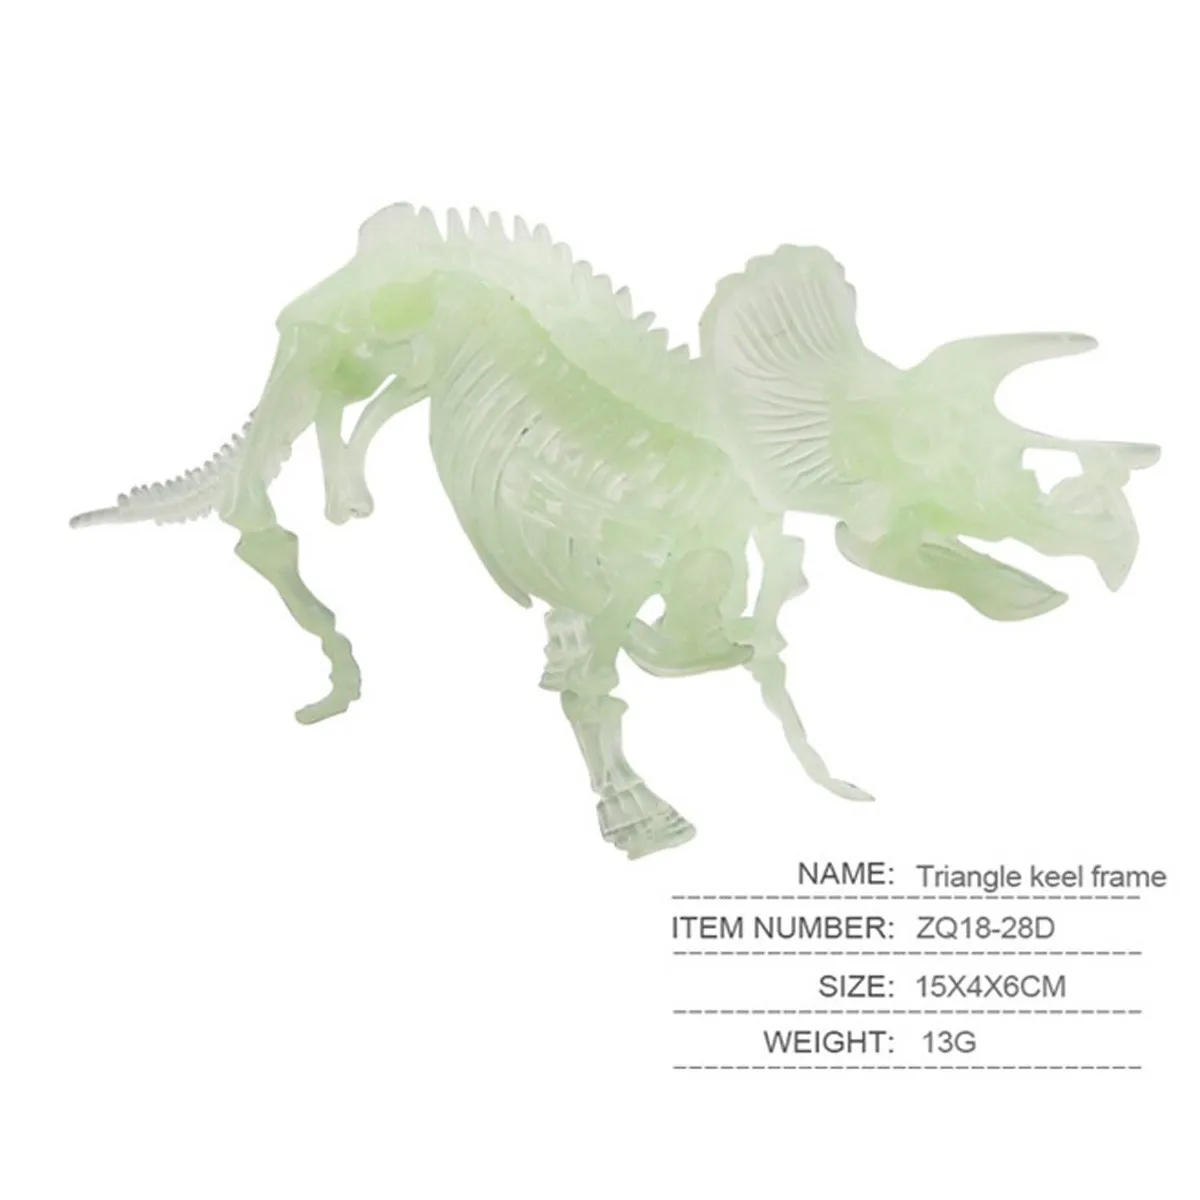 

Simulated Dinosaurs Bones Luminous Human Skeleton Model Halloween Toy Masquerade Party Great for counting Perfect free shipping